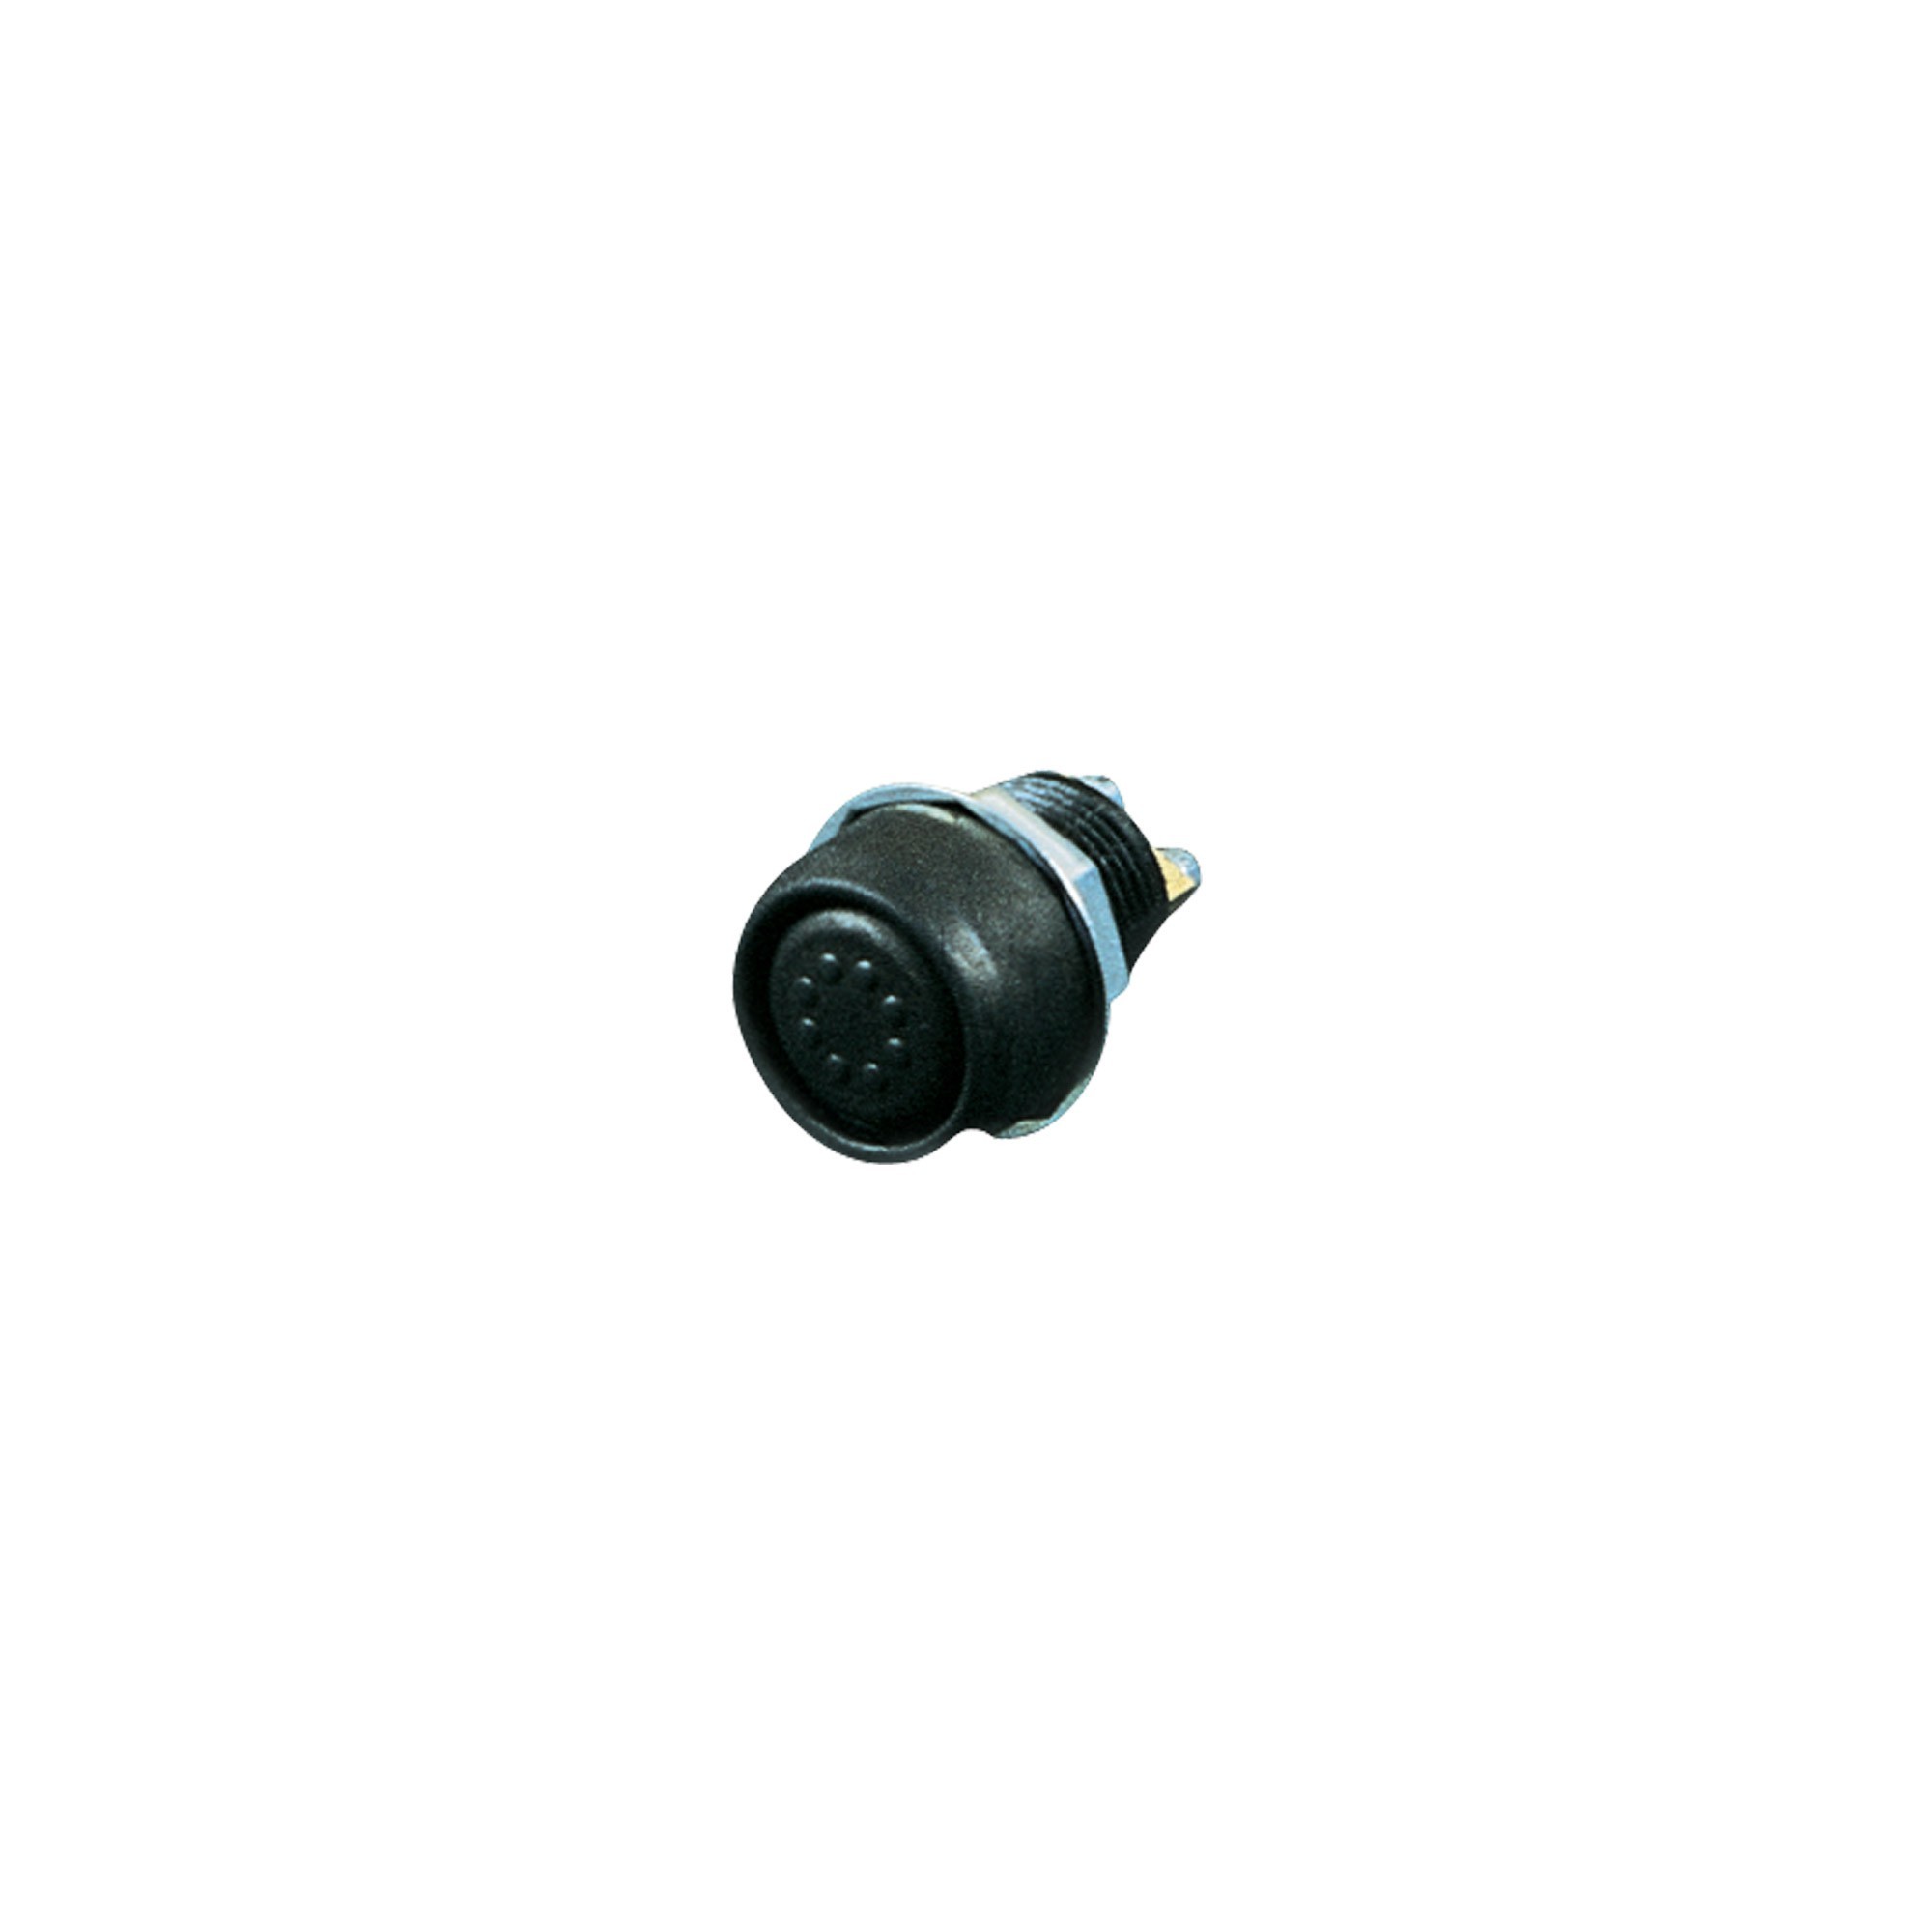 OMP Racing EA0-0467 Push Button Switch, 2 Pole, 12.5 amp, 12V, Rubber Coated, Black, Each